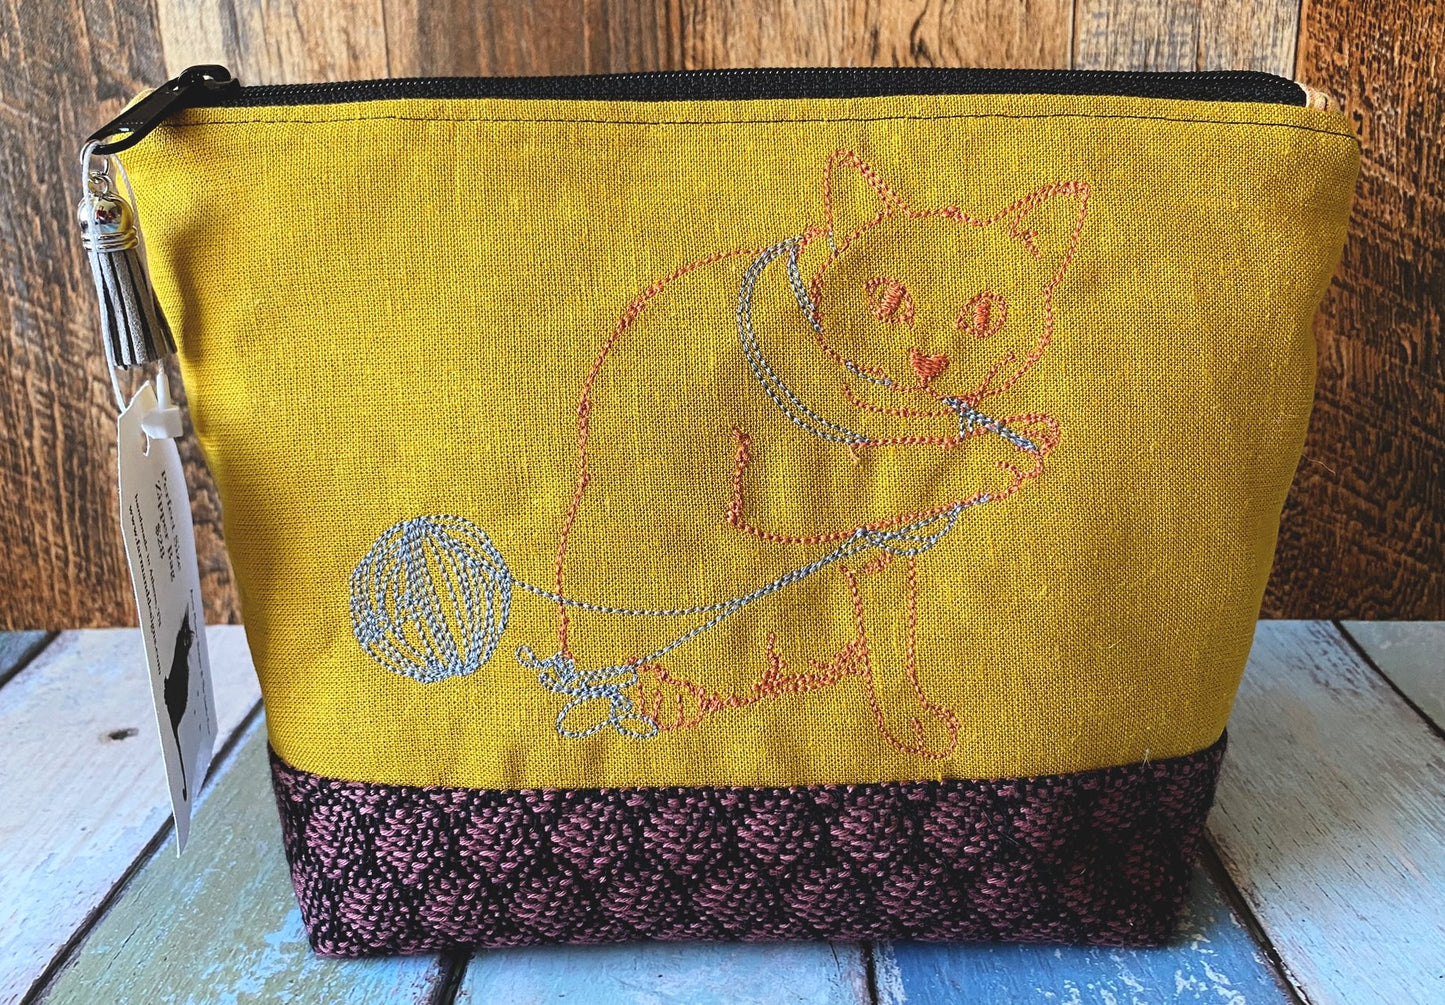 Helpful Cats Project or Cosmetic Cat Bag